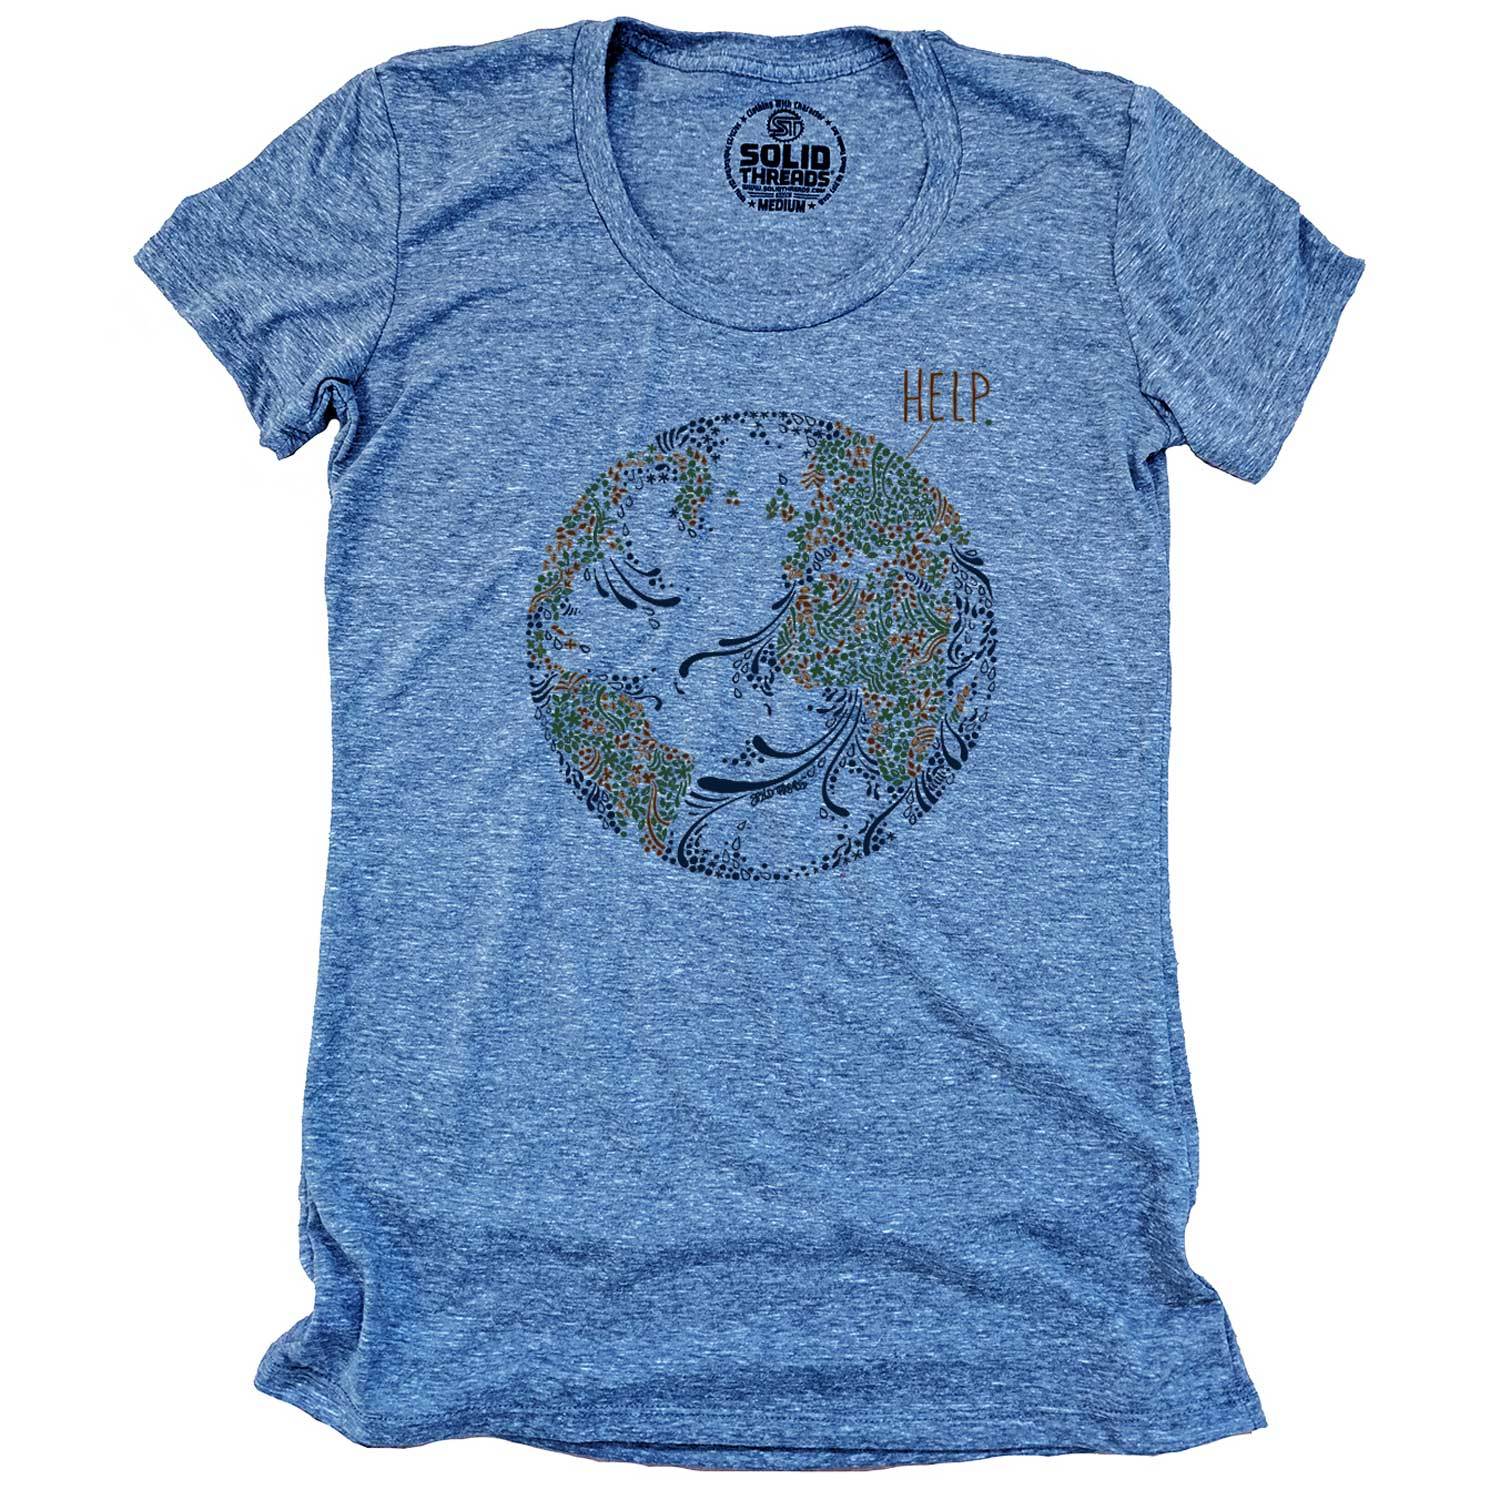 Women's Earth Help Vintage Inspired Scoopneck T-Shirt | Cool Environmentalism Graphic Tee | Solid Threads